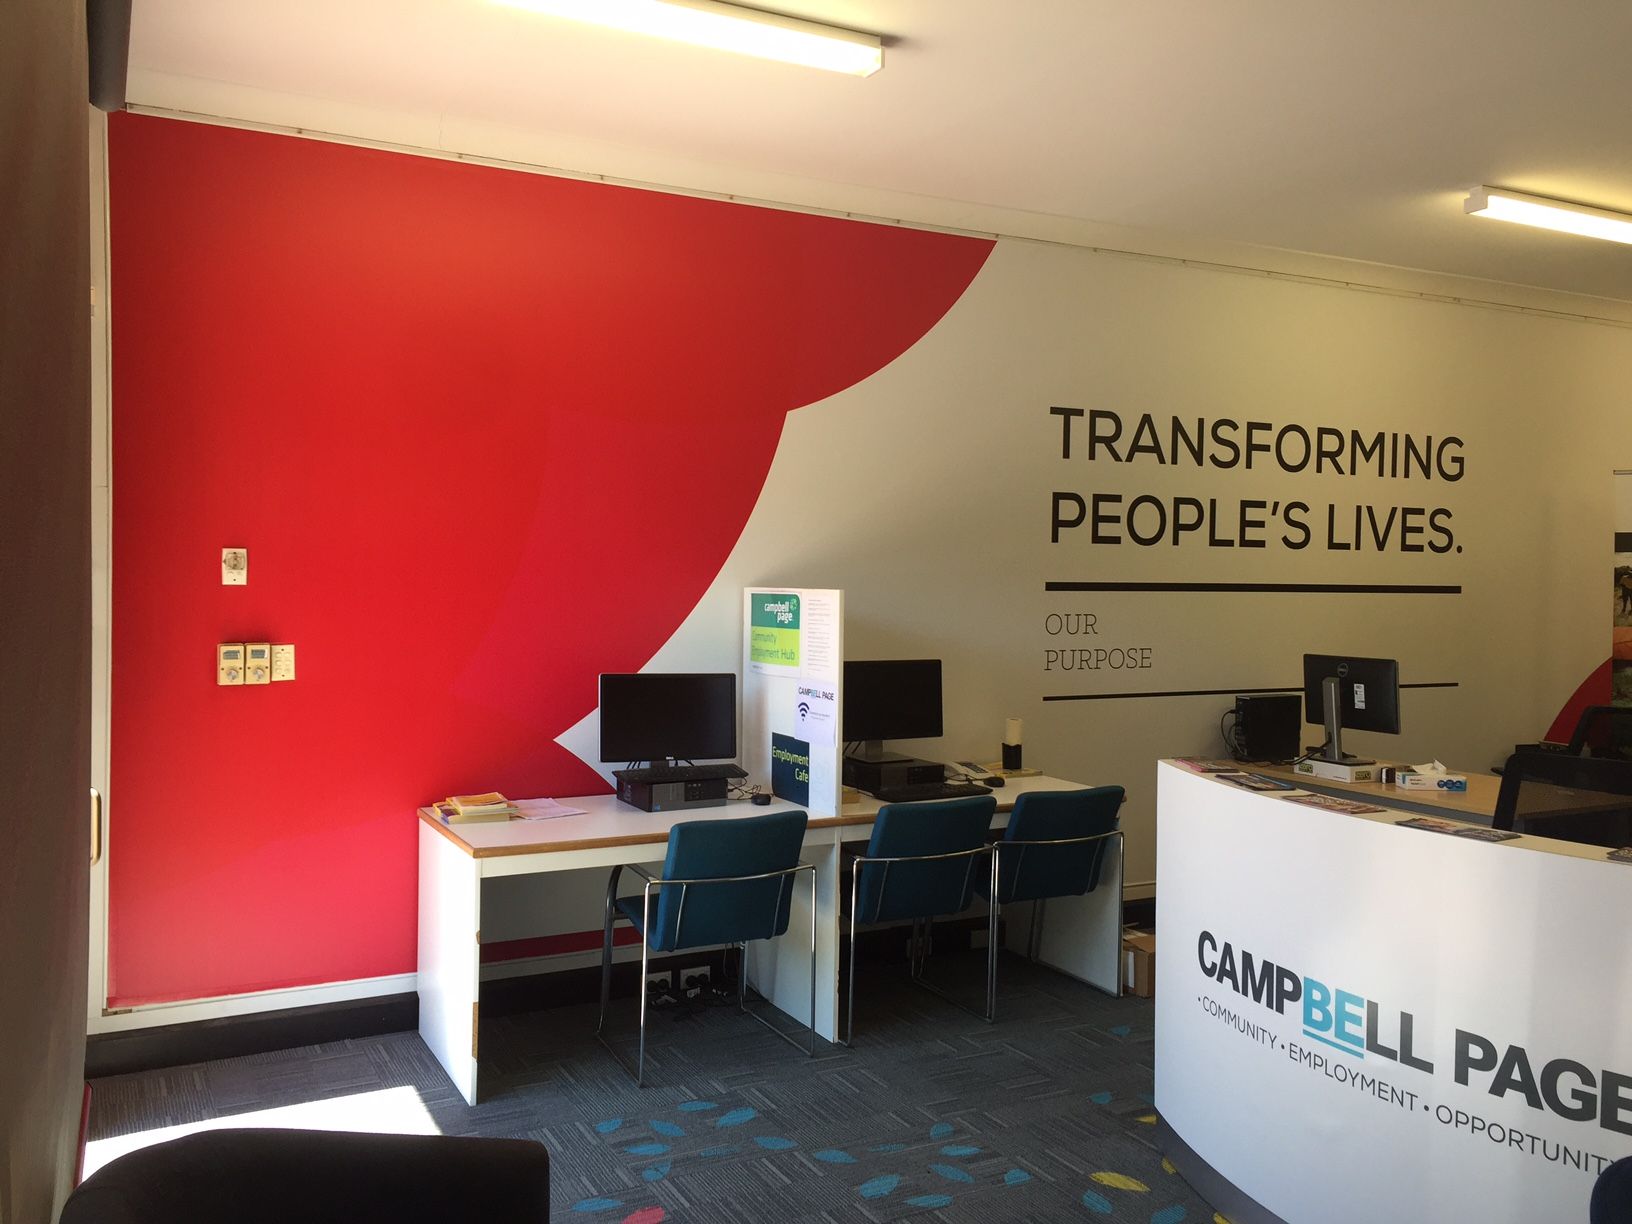 Campbell Page, "Transforming People's Lives"